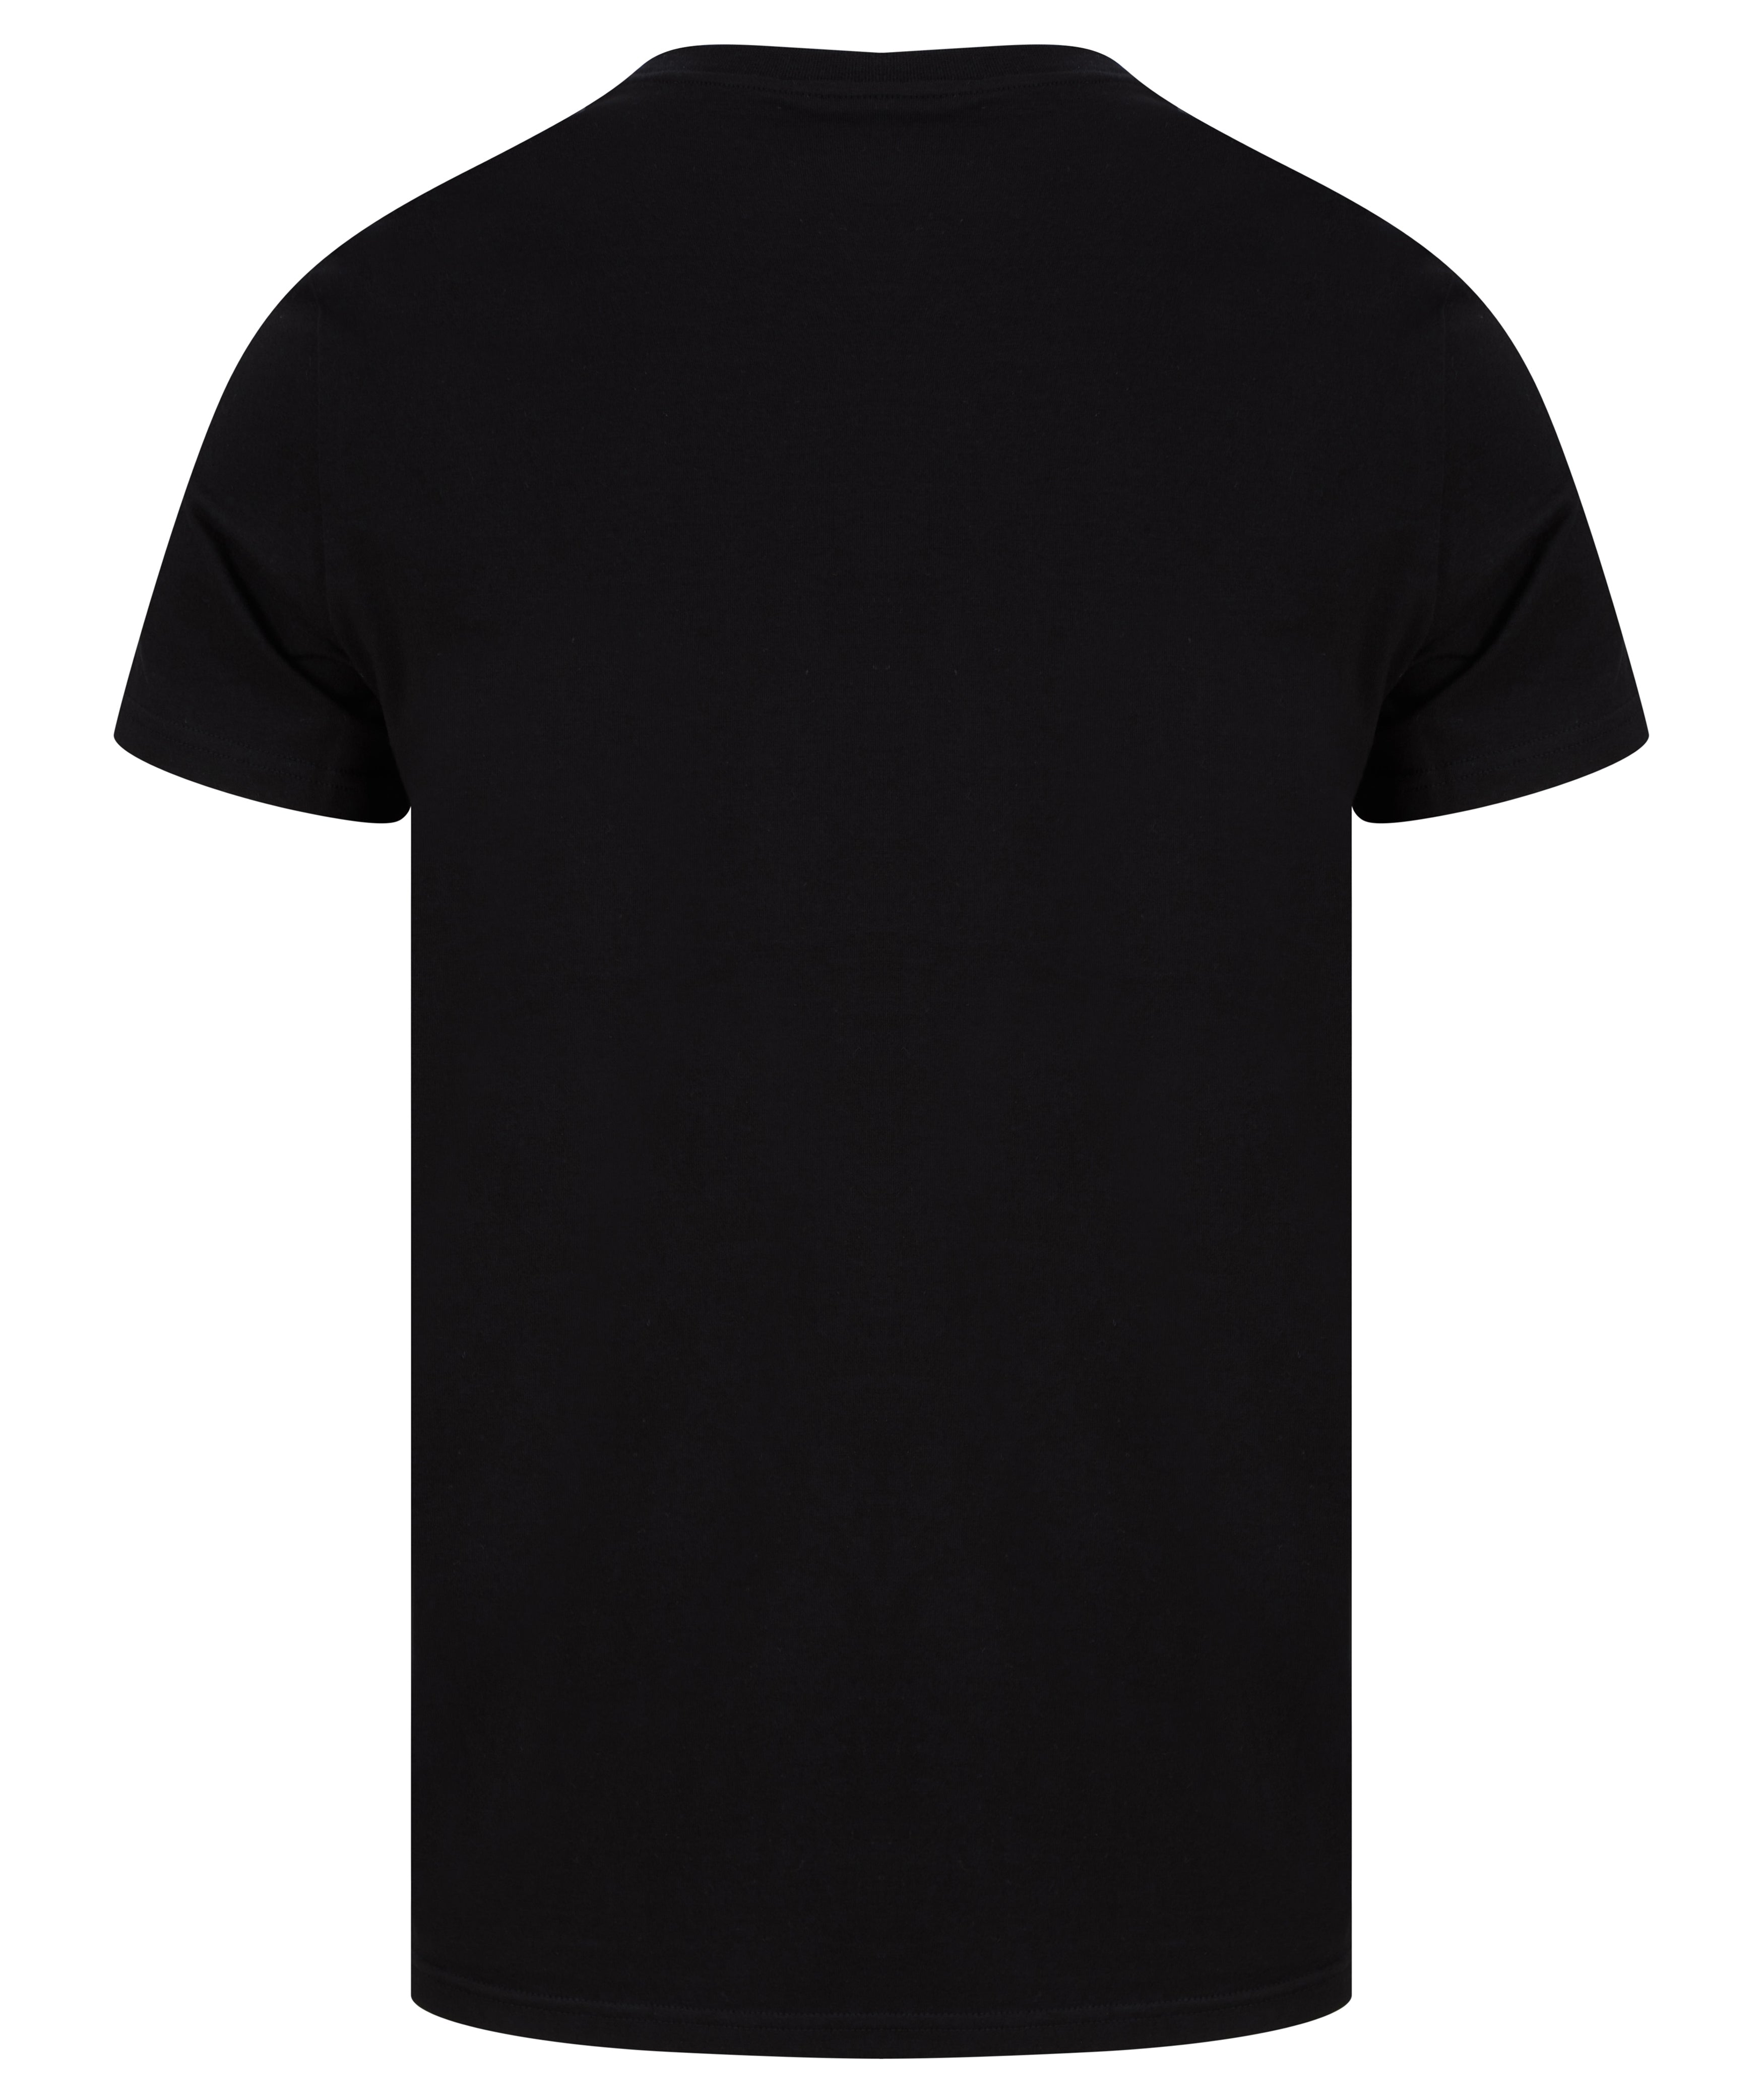 Load image into Gallery viewer, DSquared2 Logo T Shirt Black
